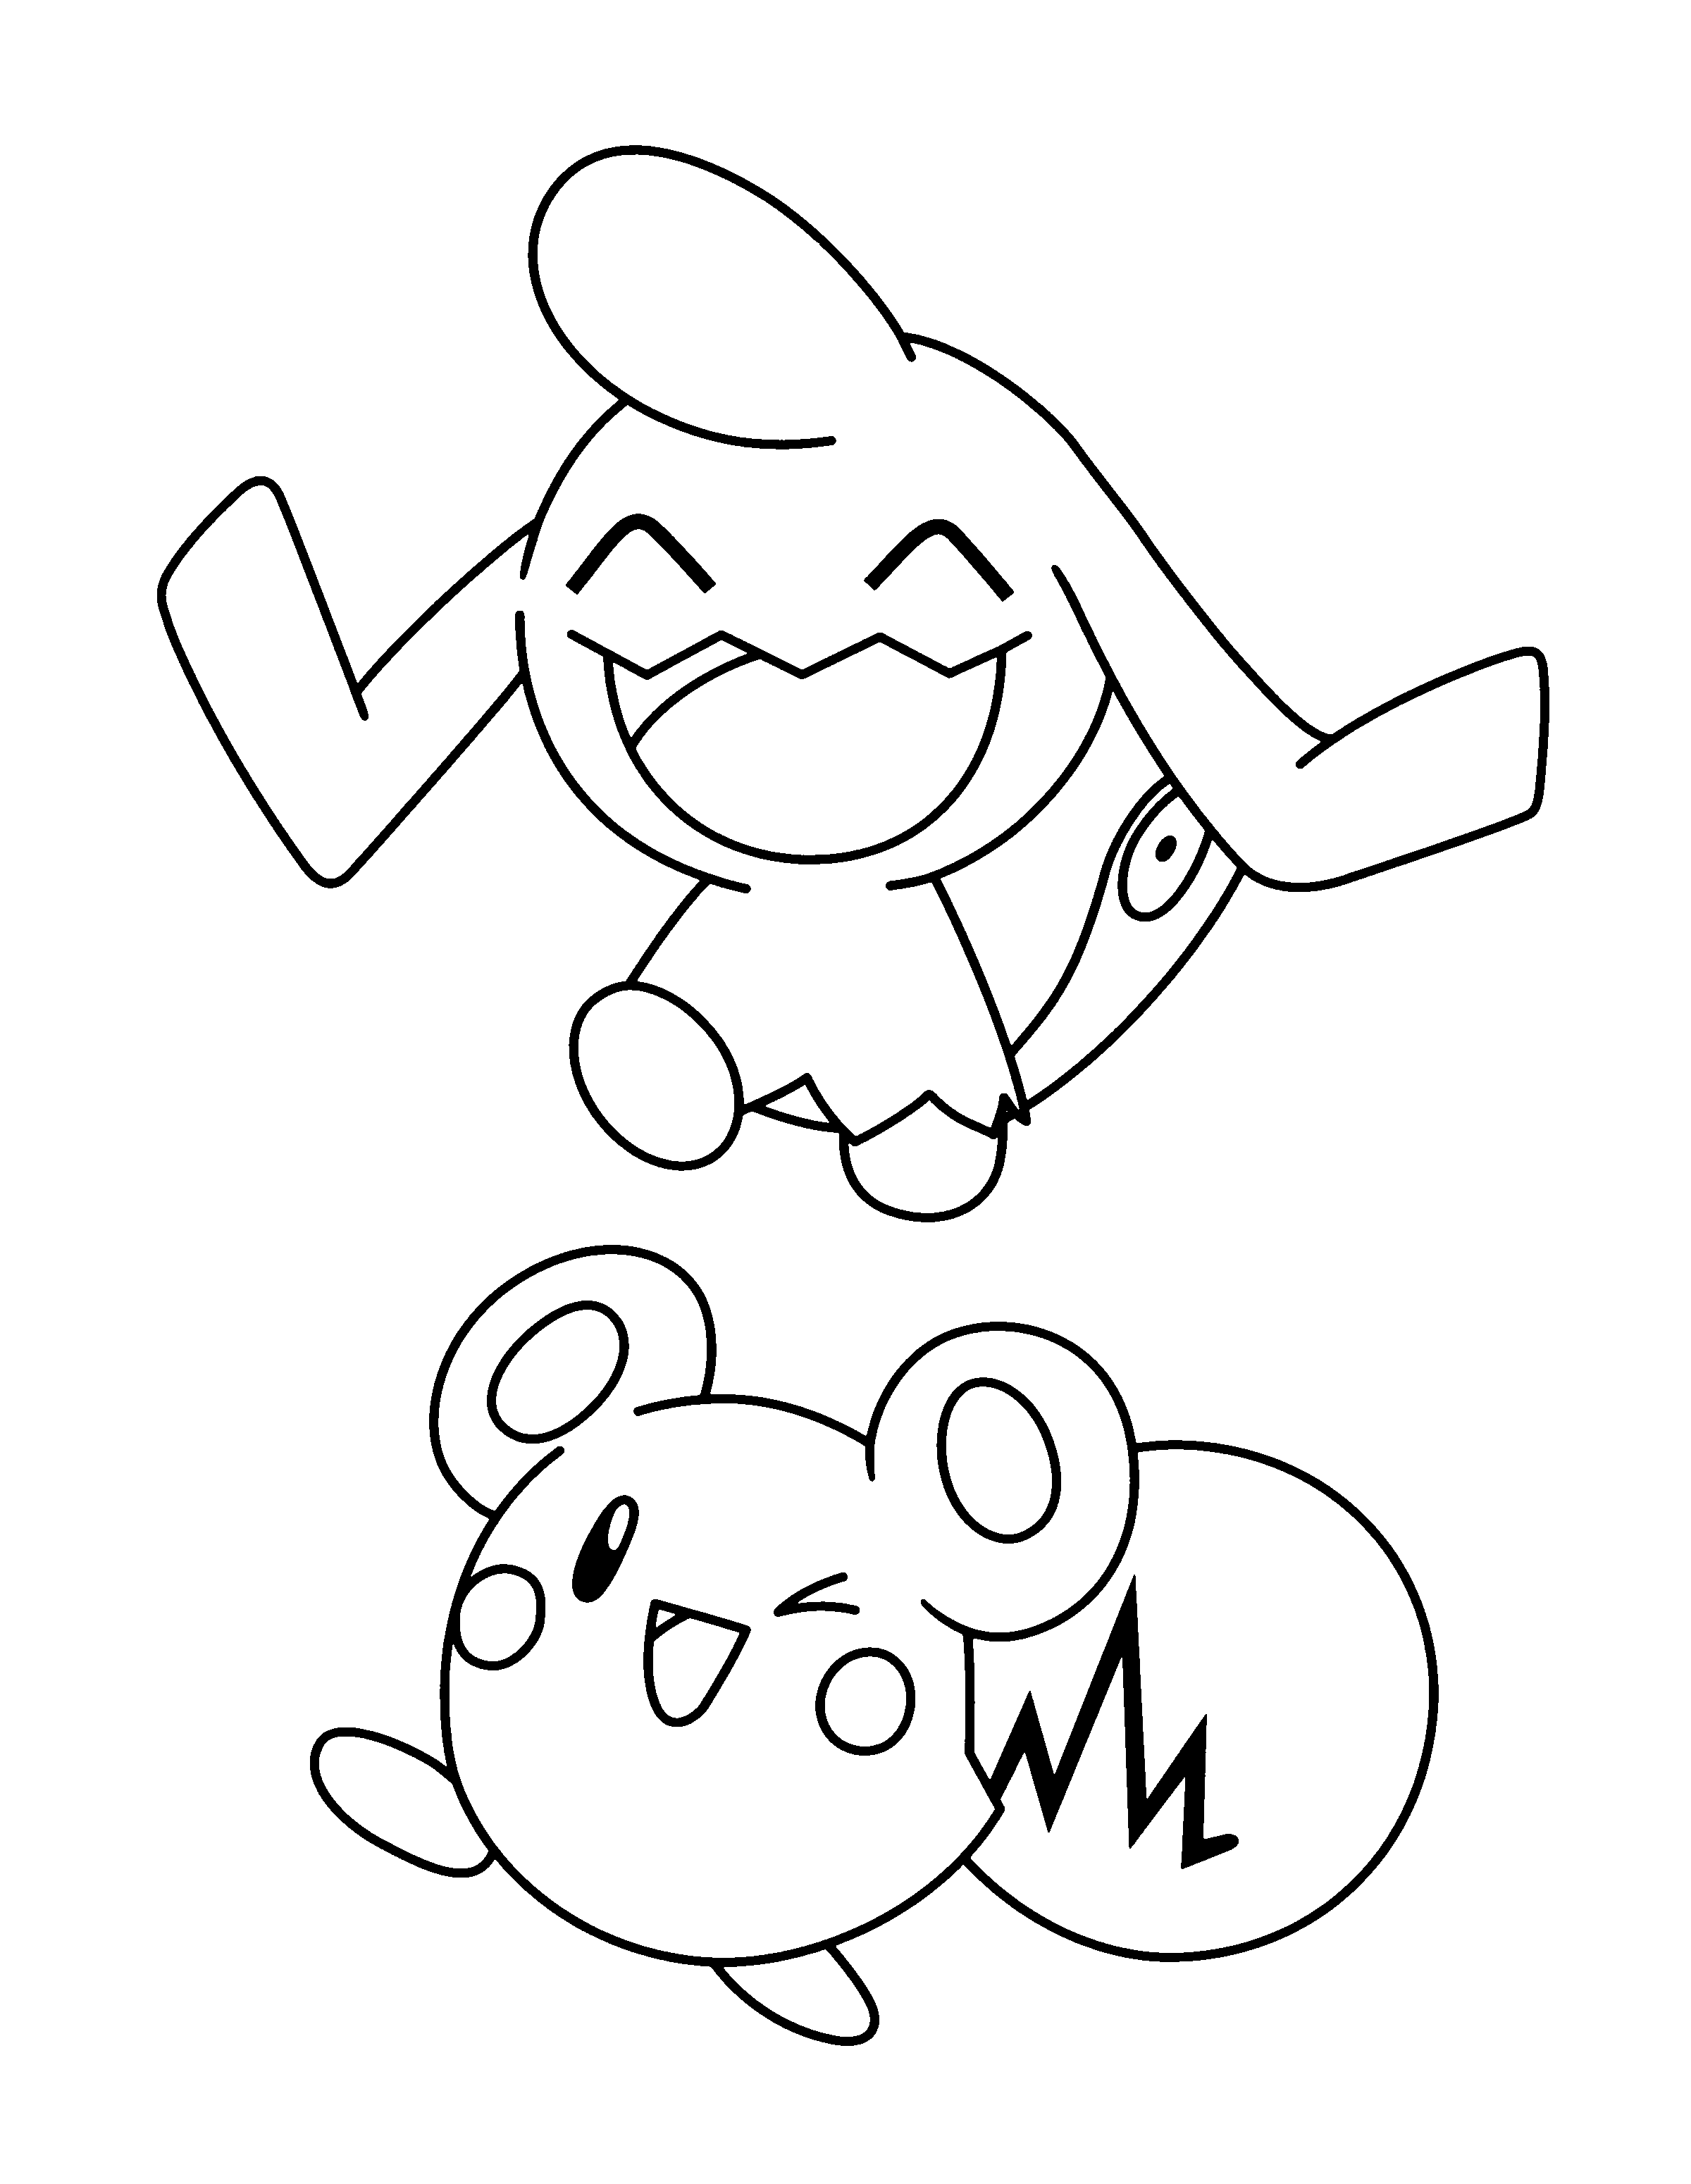 animated-coloring-pages-pokemon-image-1049